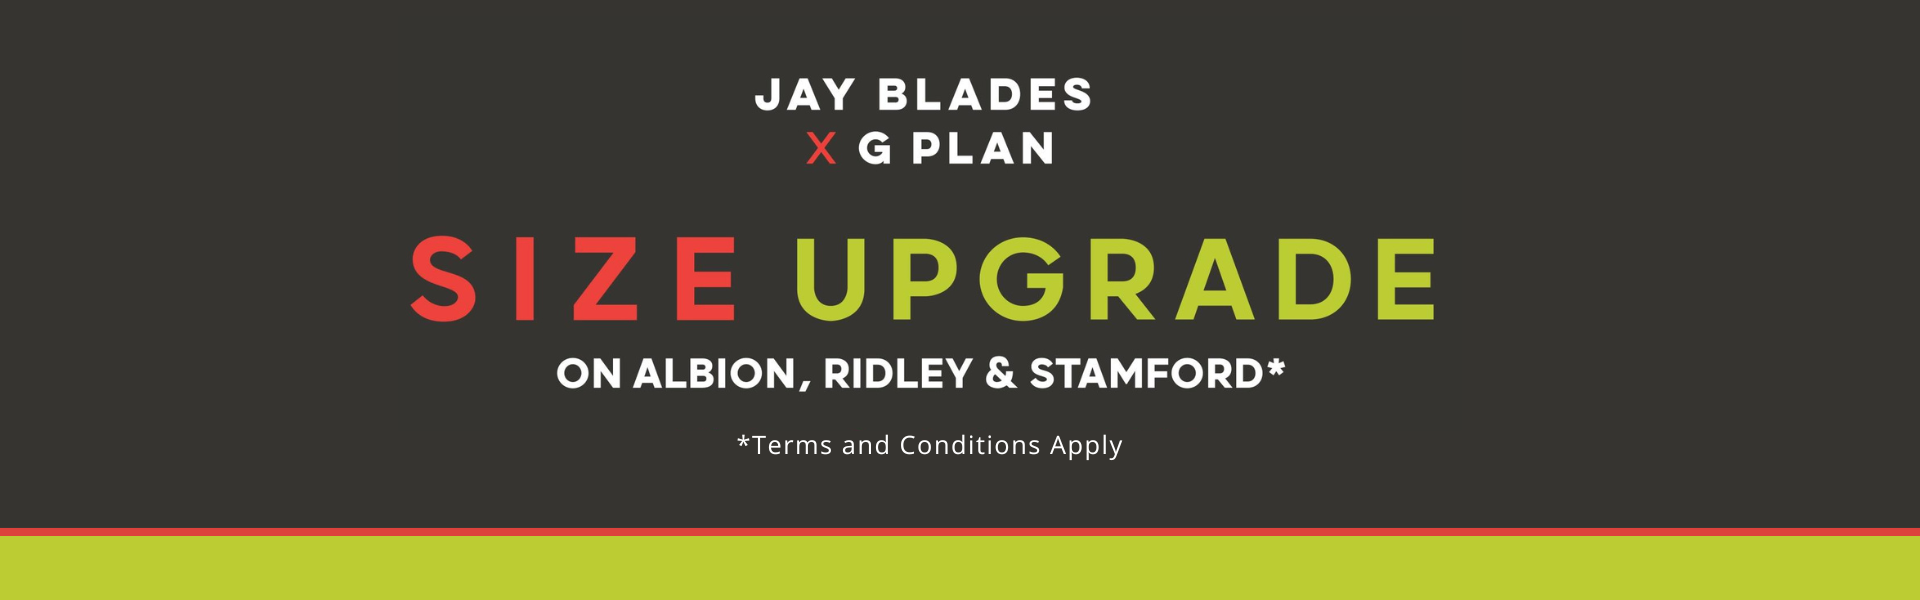 Jay Blades Landing Page Banner Free Size Upgrade